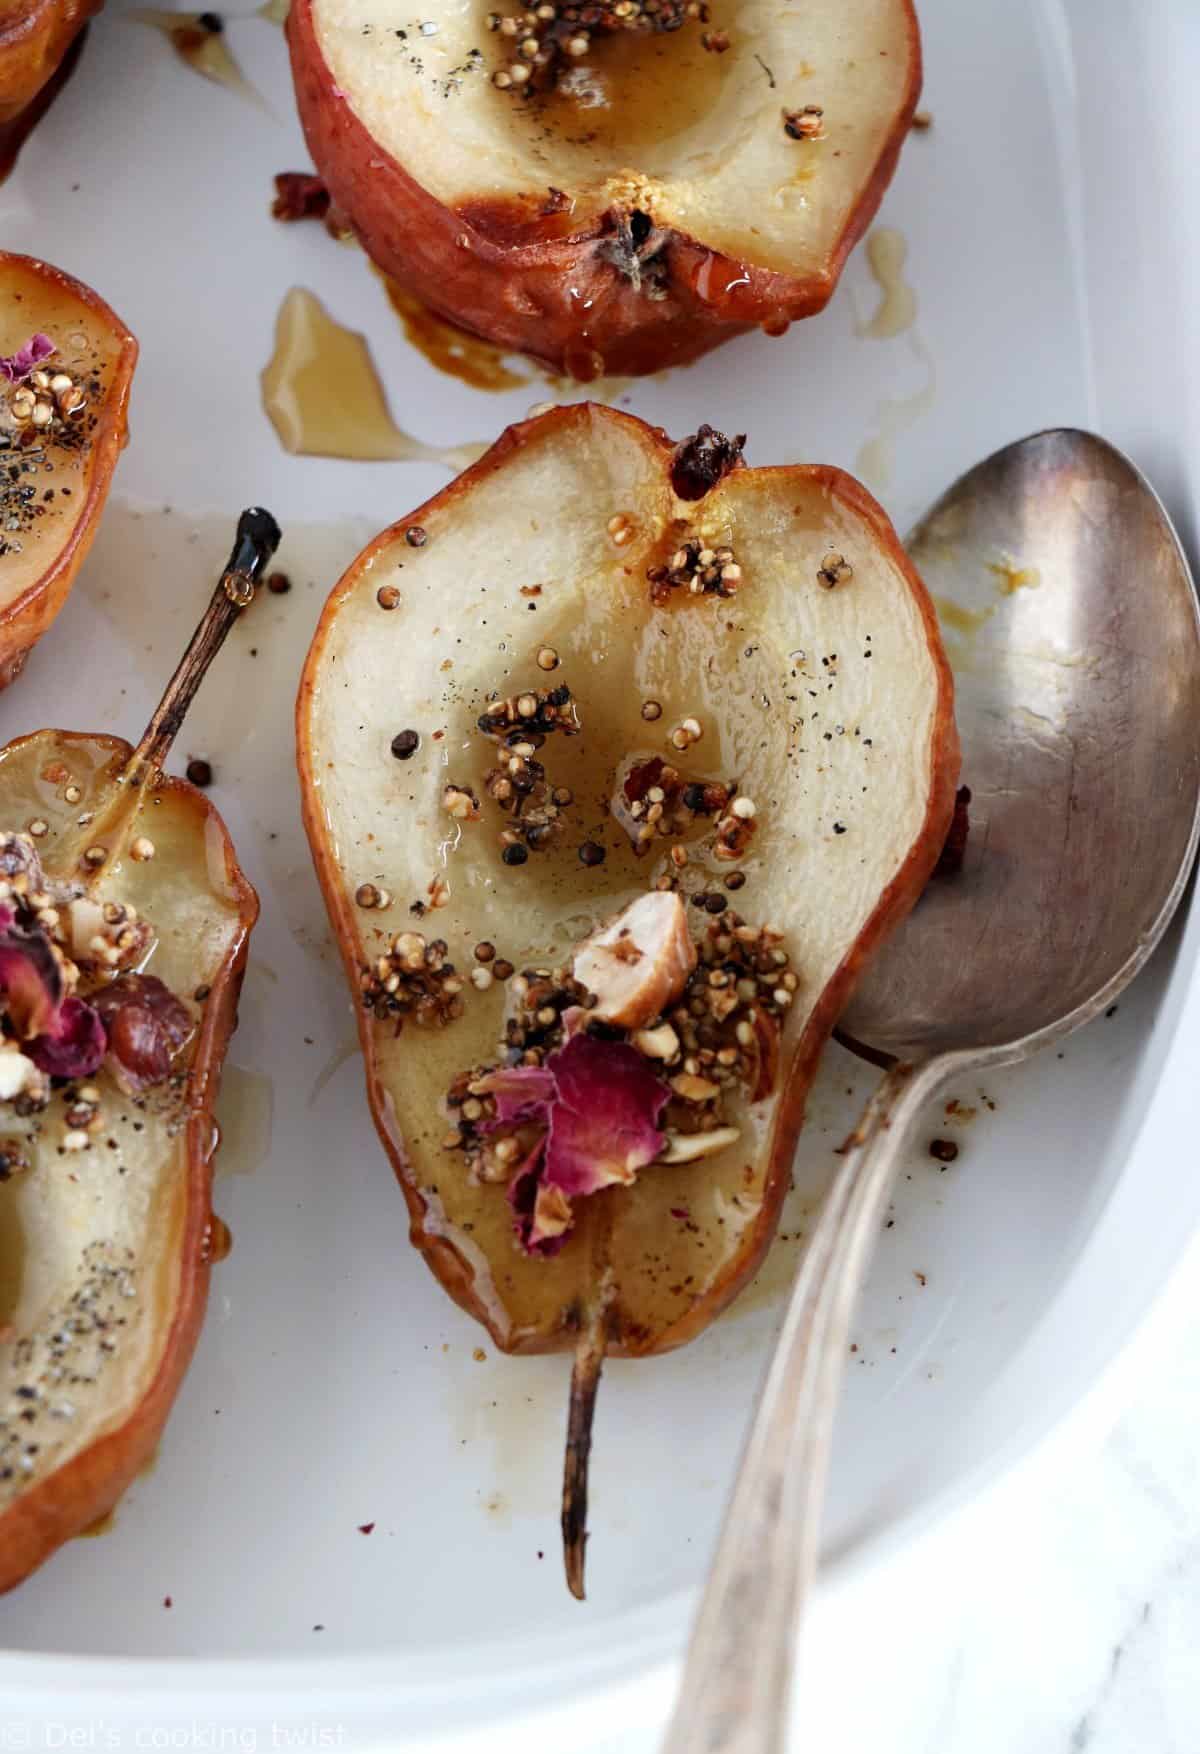 Cardamom-Infused Pears with Quinoa-Nut Crunch